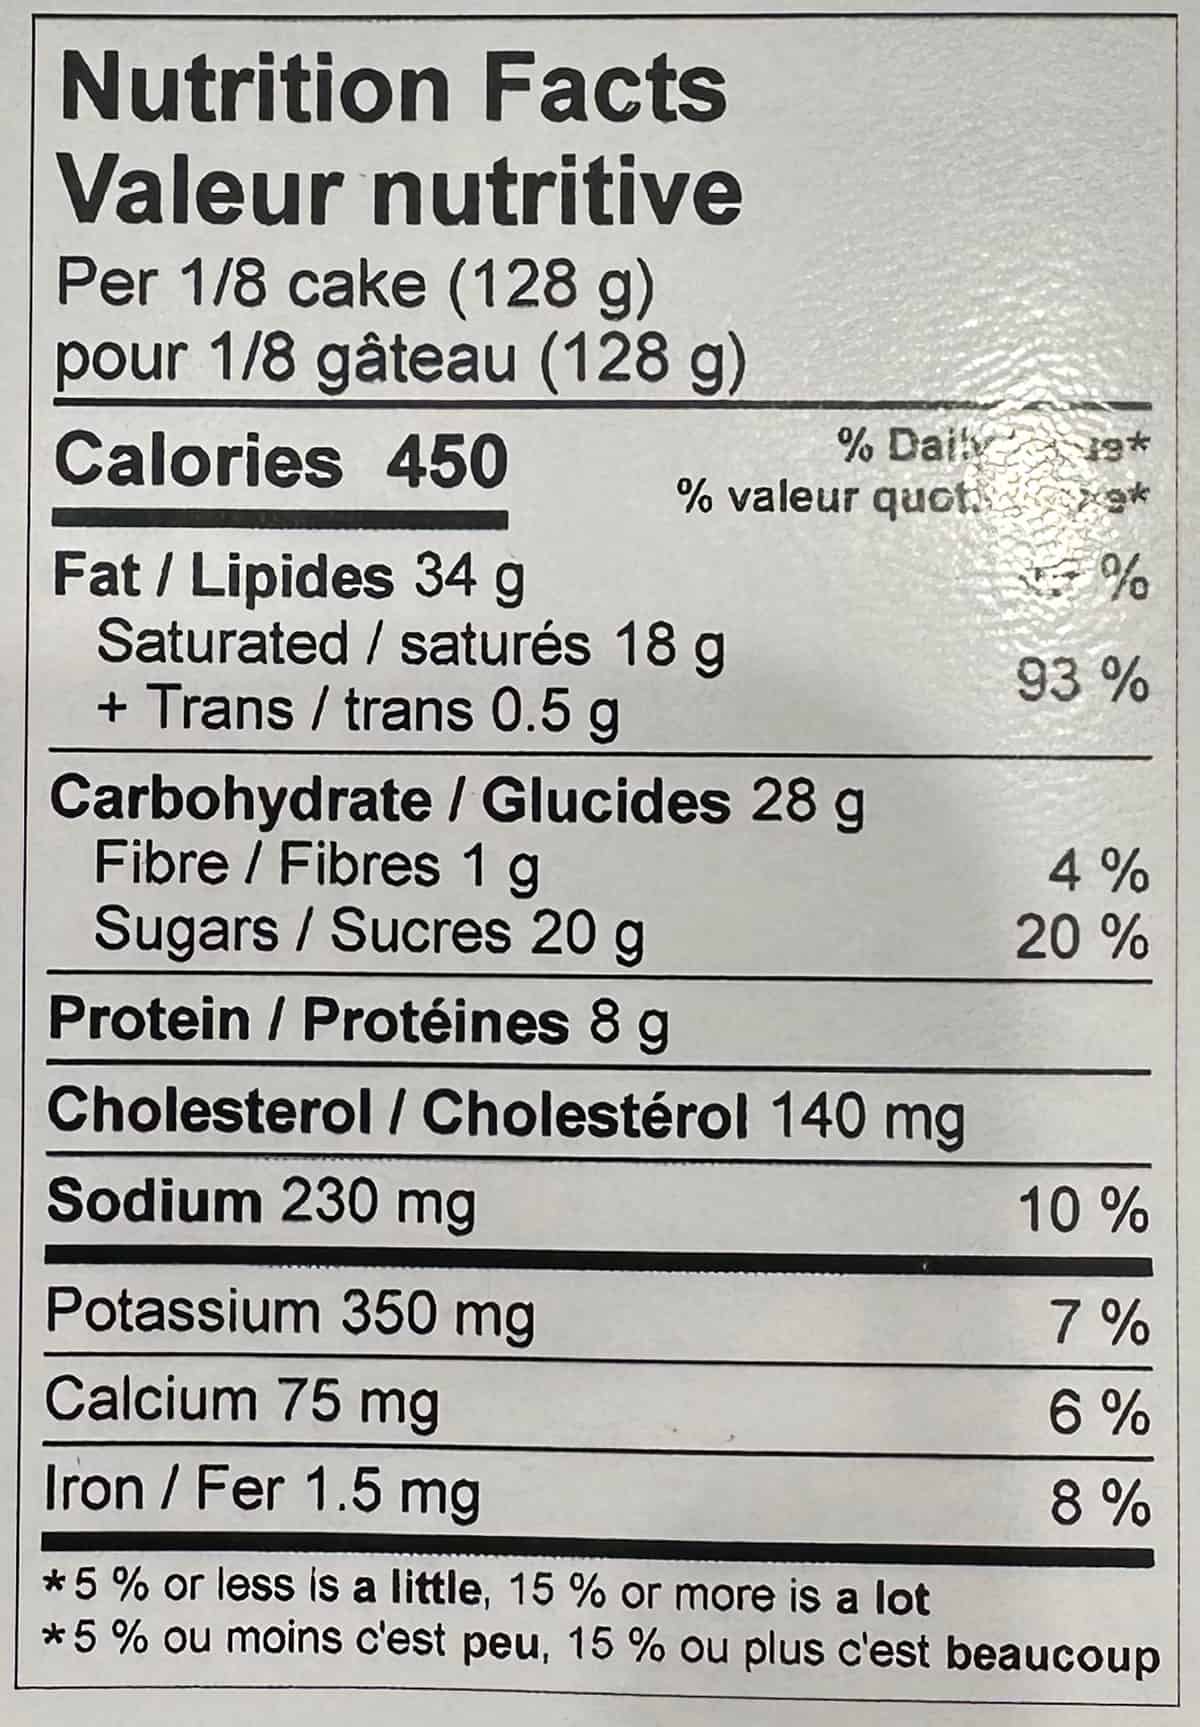 Image of the nutrition facts for the Pistachio cake.